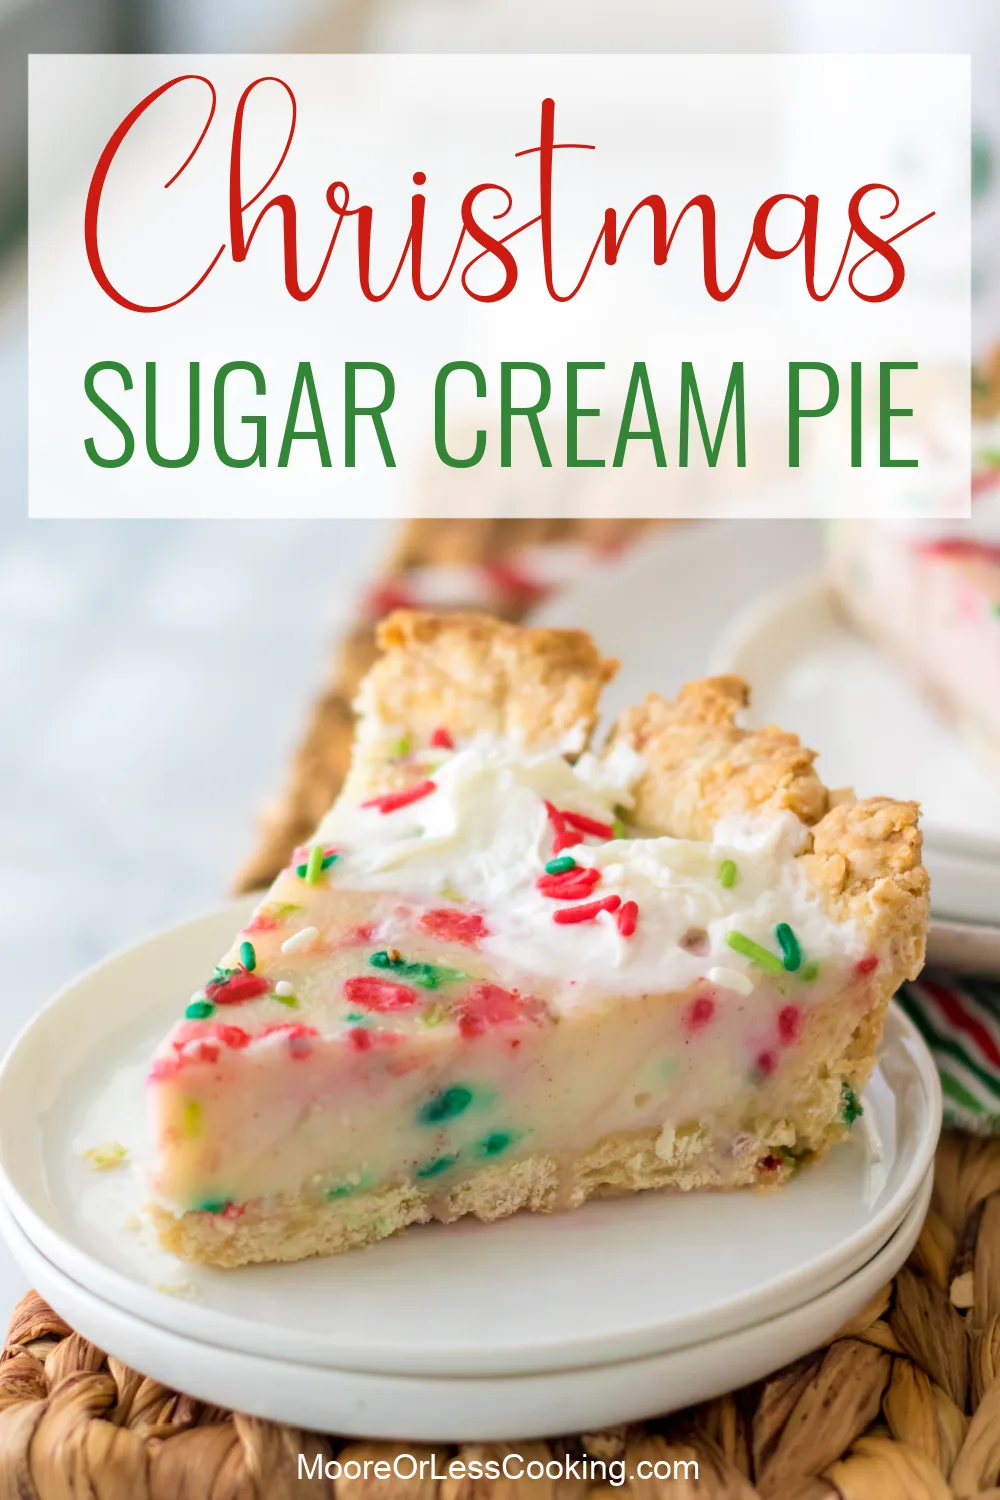 A sweet, creamy vanilla custard filling that's dotted with festive sprinkles makes this Christmas Sugar Cream Pie an irresistible holiday dessert. And best of all, you can make it with simple pantry ingredients! via @Mooreorlesscook